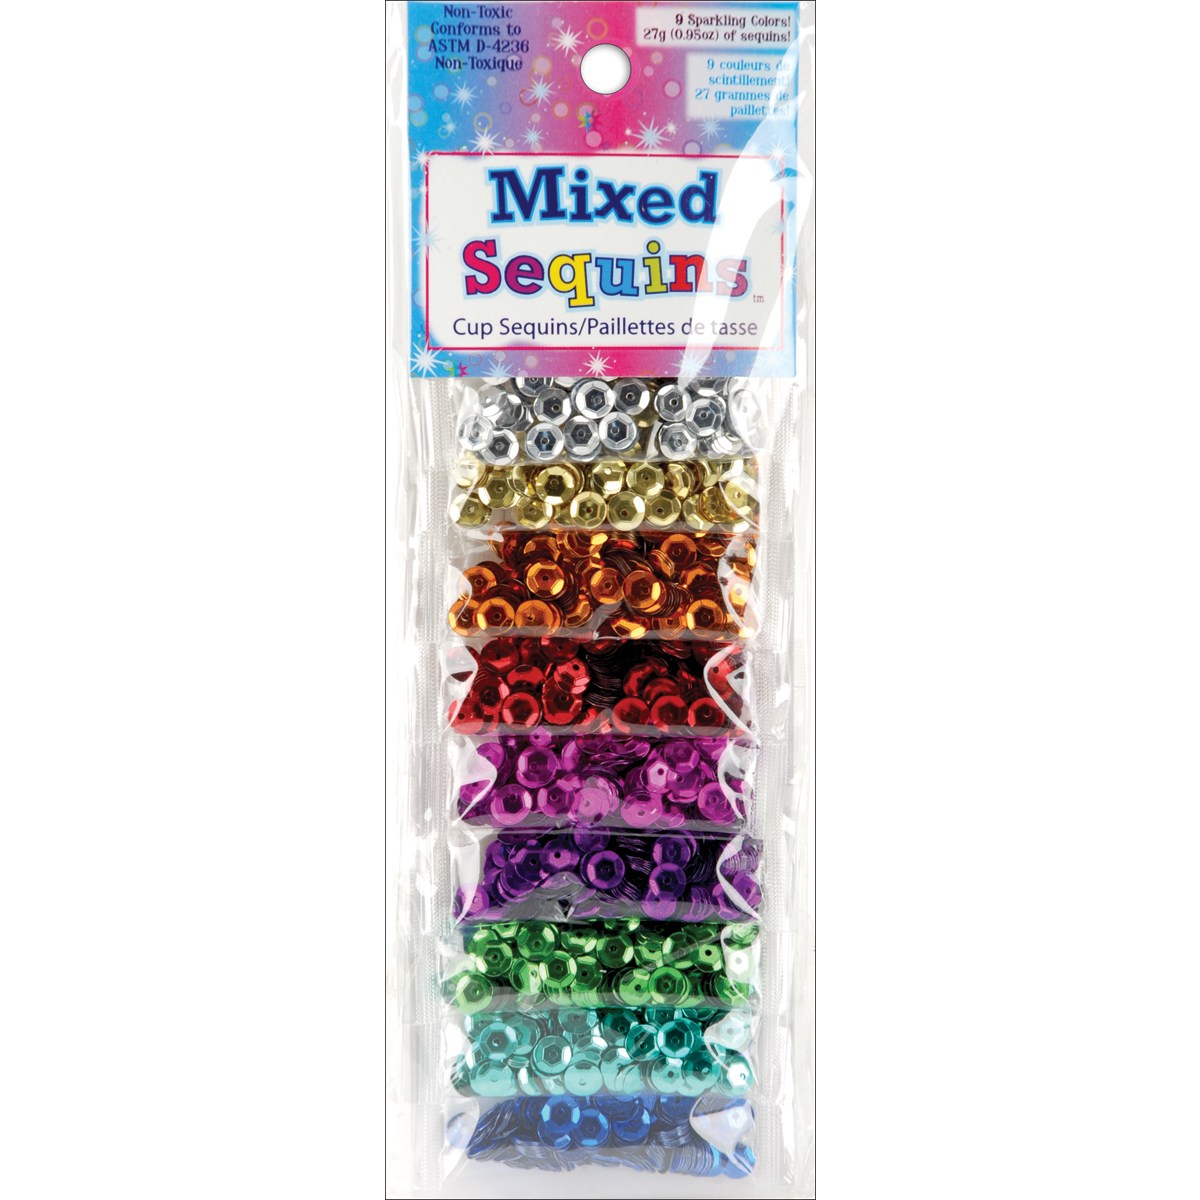 Sulyn Assorted Cups of Mixed Sequins, 9 pack - image 2 of 2